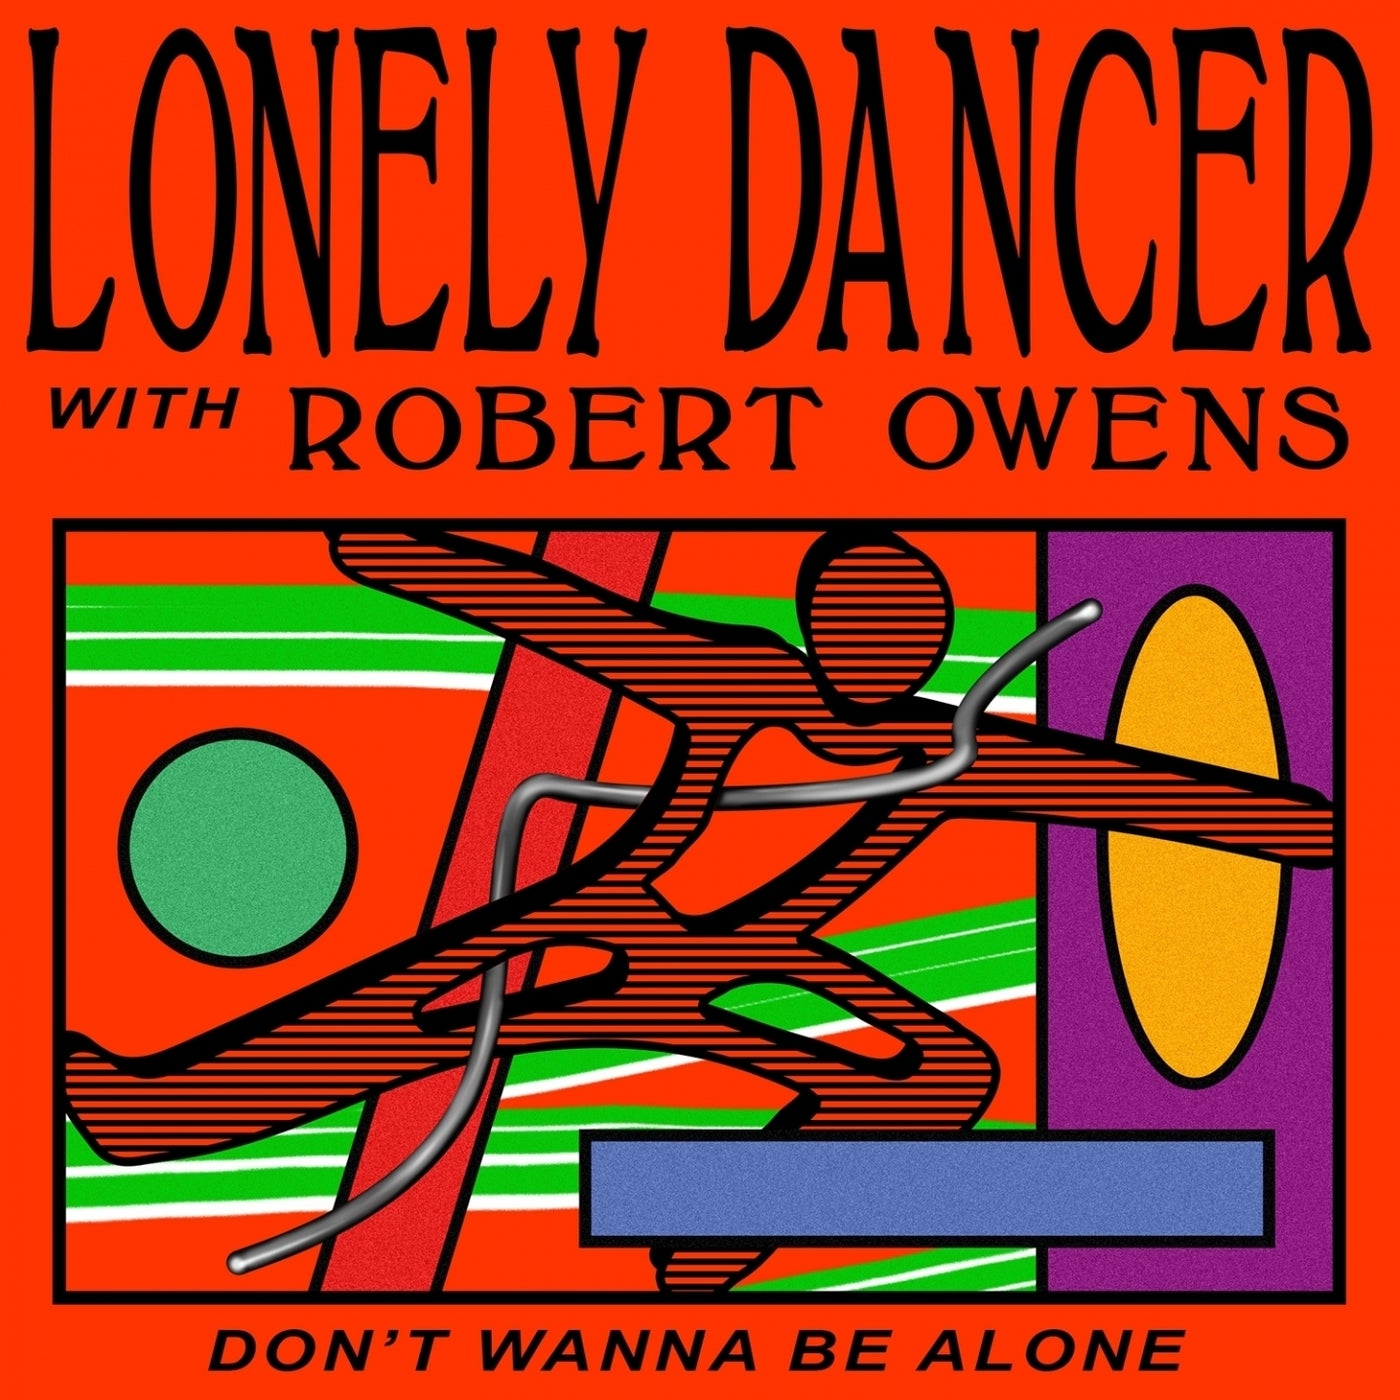 Lonely Dancer, Robert Owens – Don’t Wanna Be Alone [TA0012]